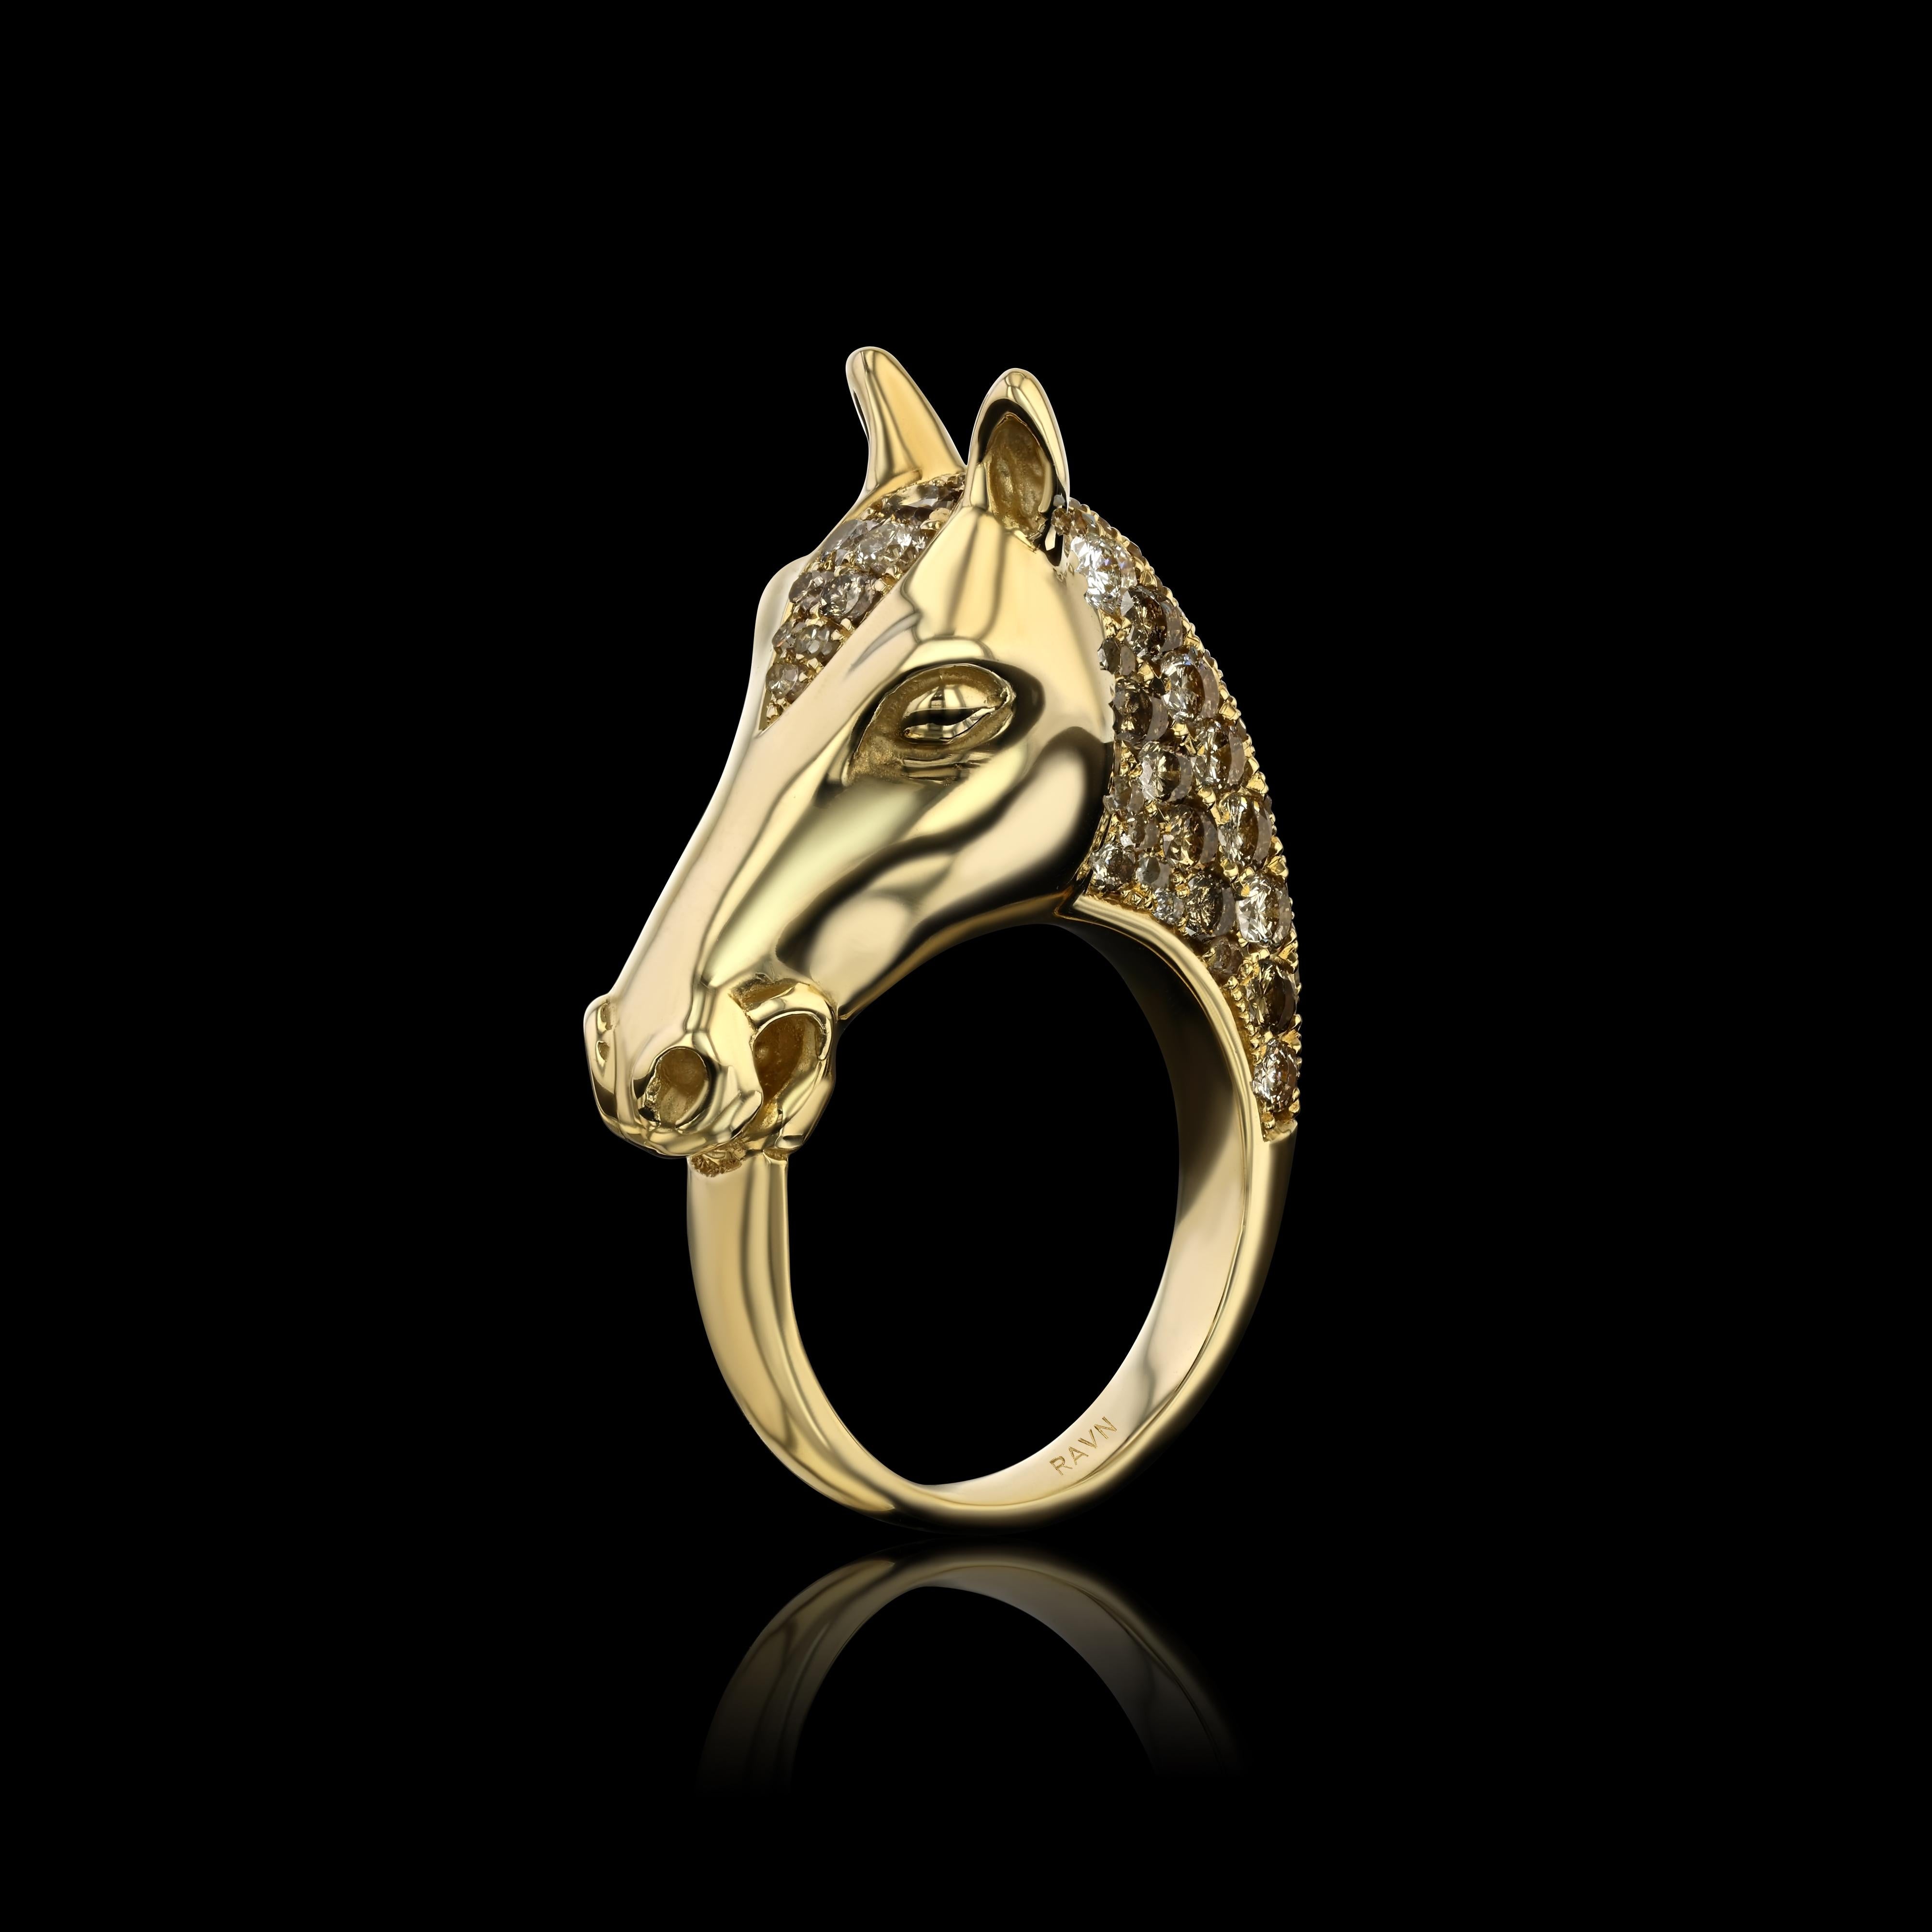 Hand carved, 18k solid yellow gold Fiala ring from the House of RAVN Equine Collection. 

The 2023 version is encrusted in 62 expertly set assorted sized round cut champagne and brown diamonds (3.01ct total) in mosaic setting.

Available in 10k,